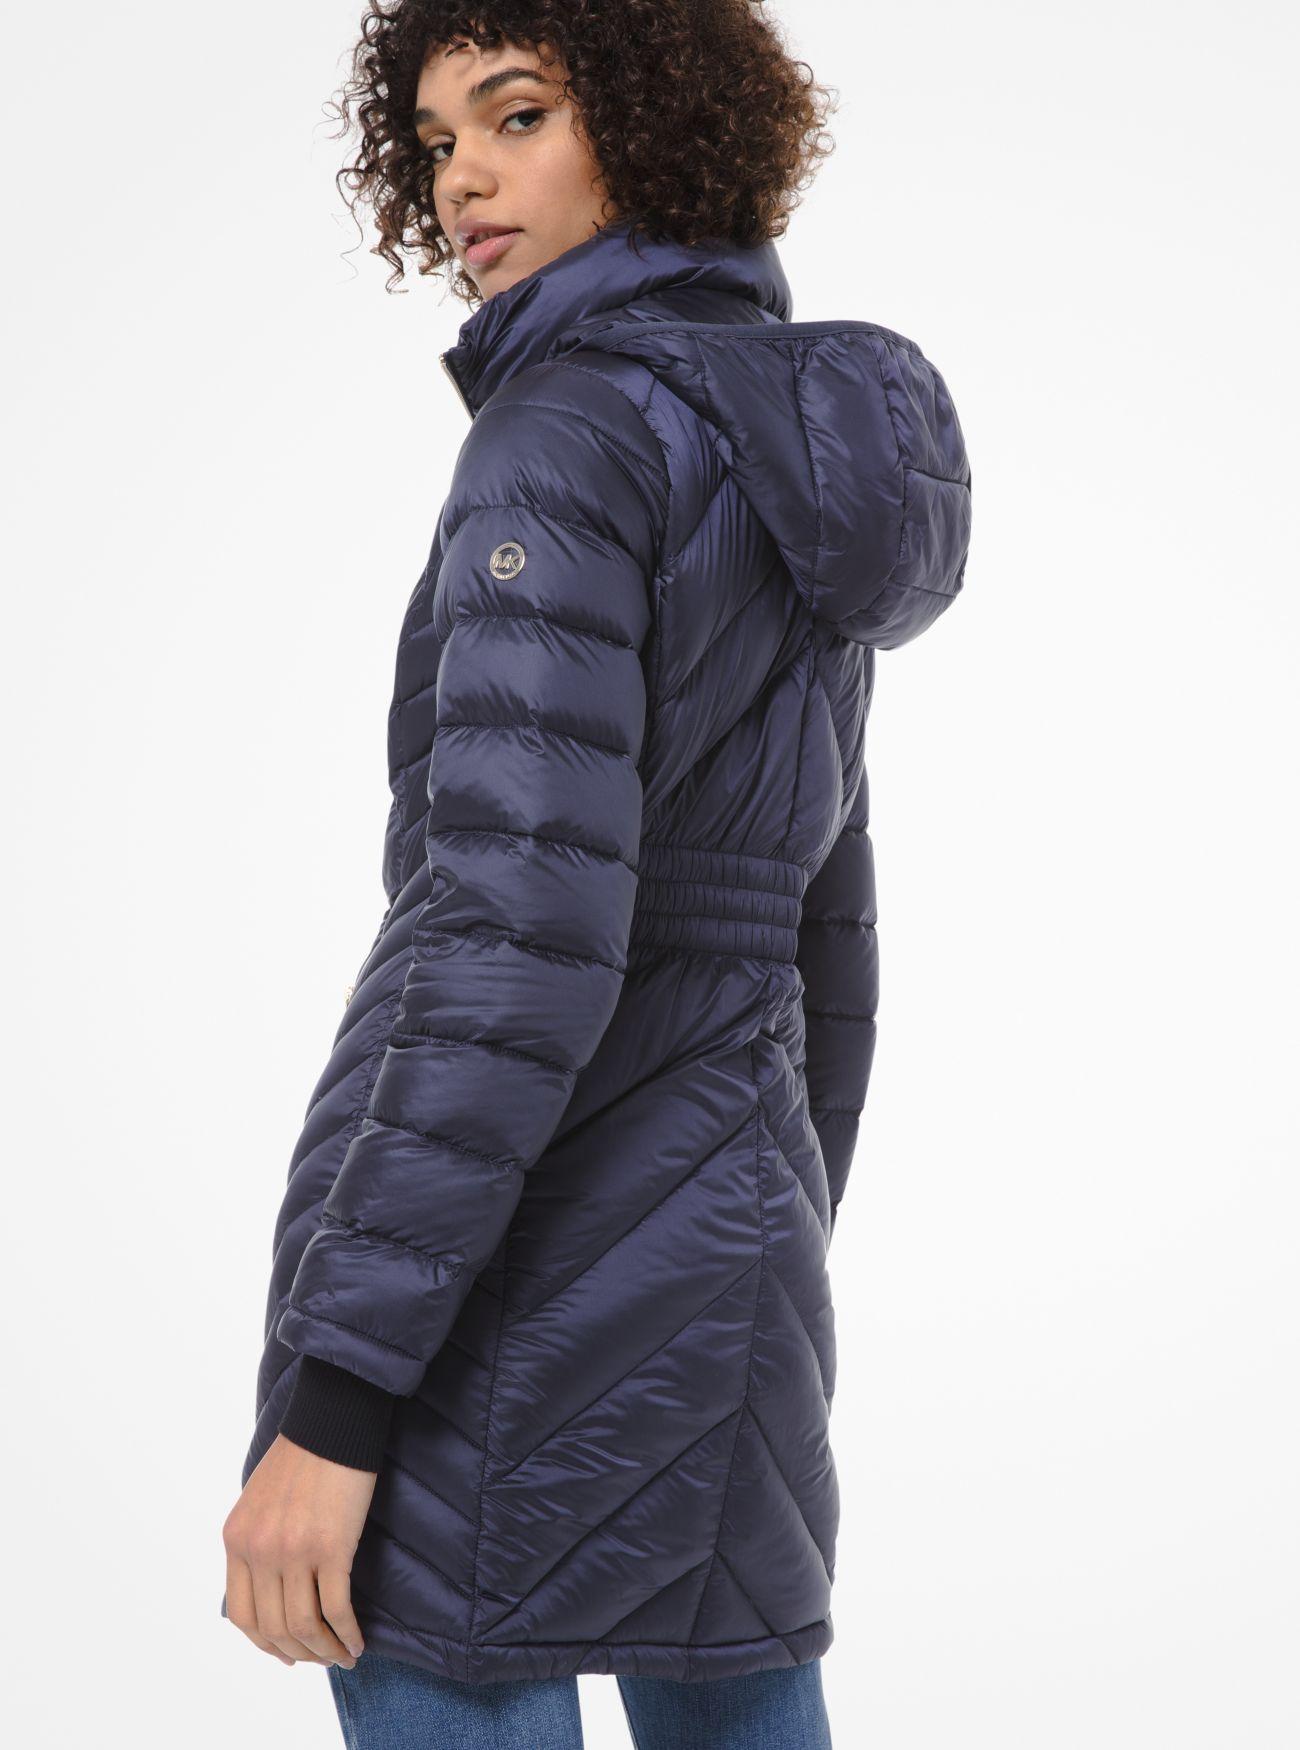 Michael Kors Synthetic Quilted Nylon Packable Puffer Coat in Blue 